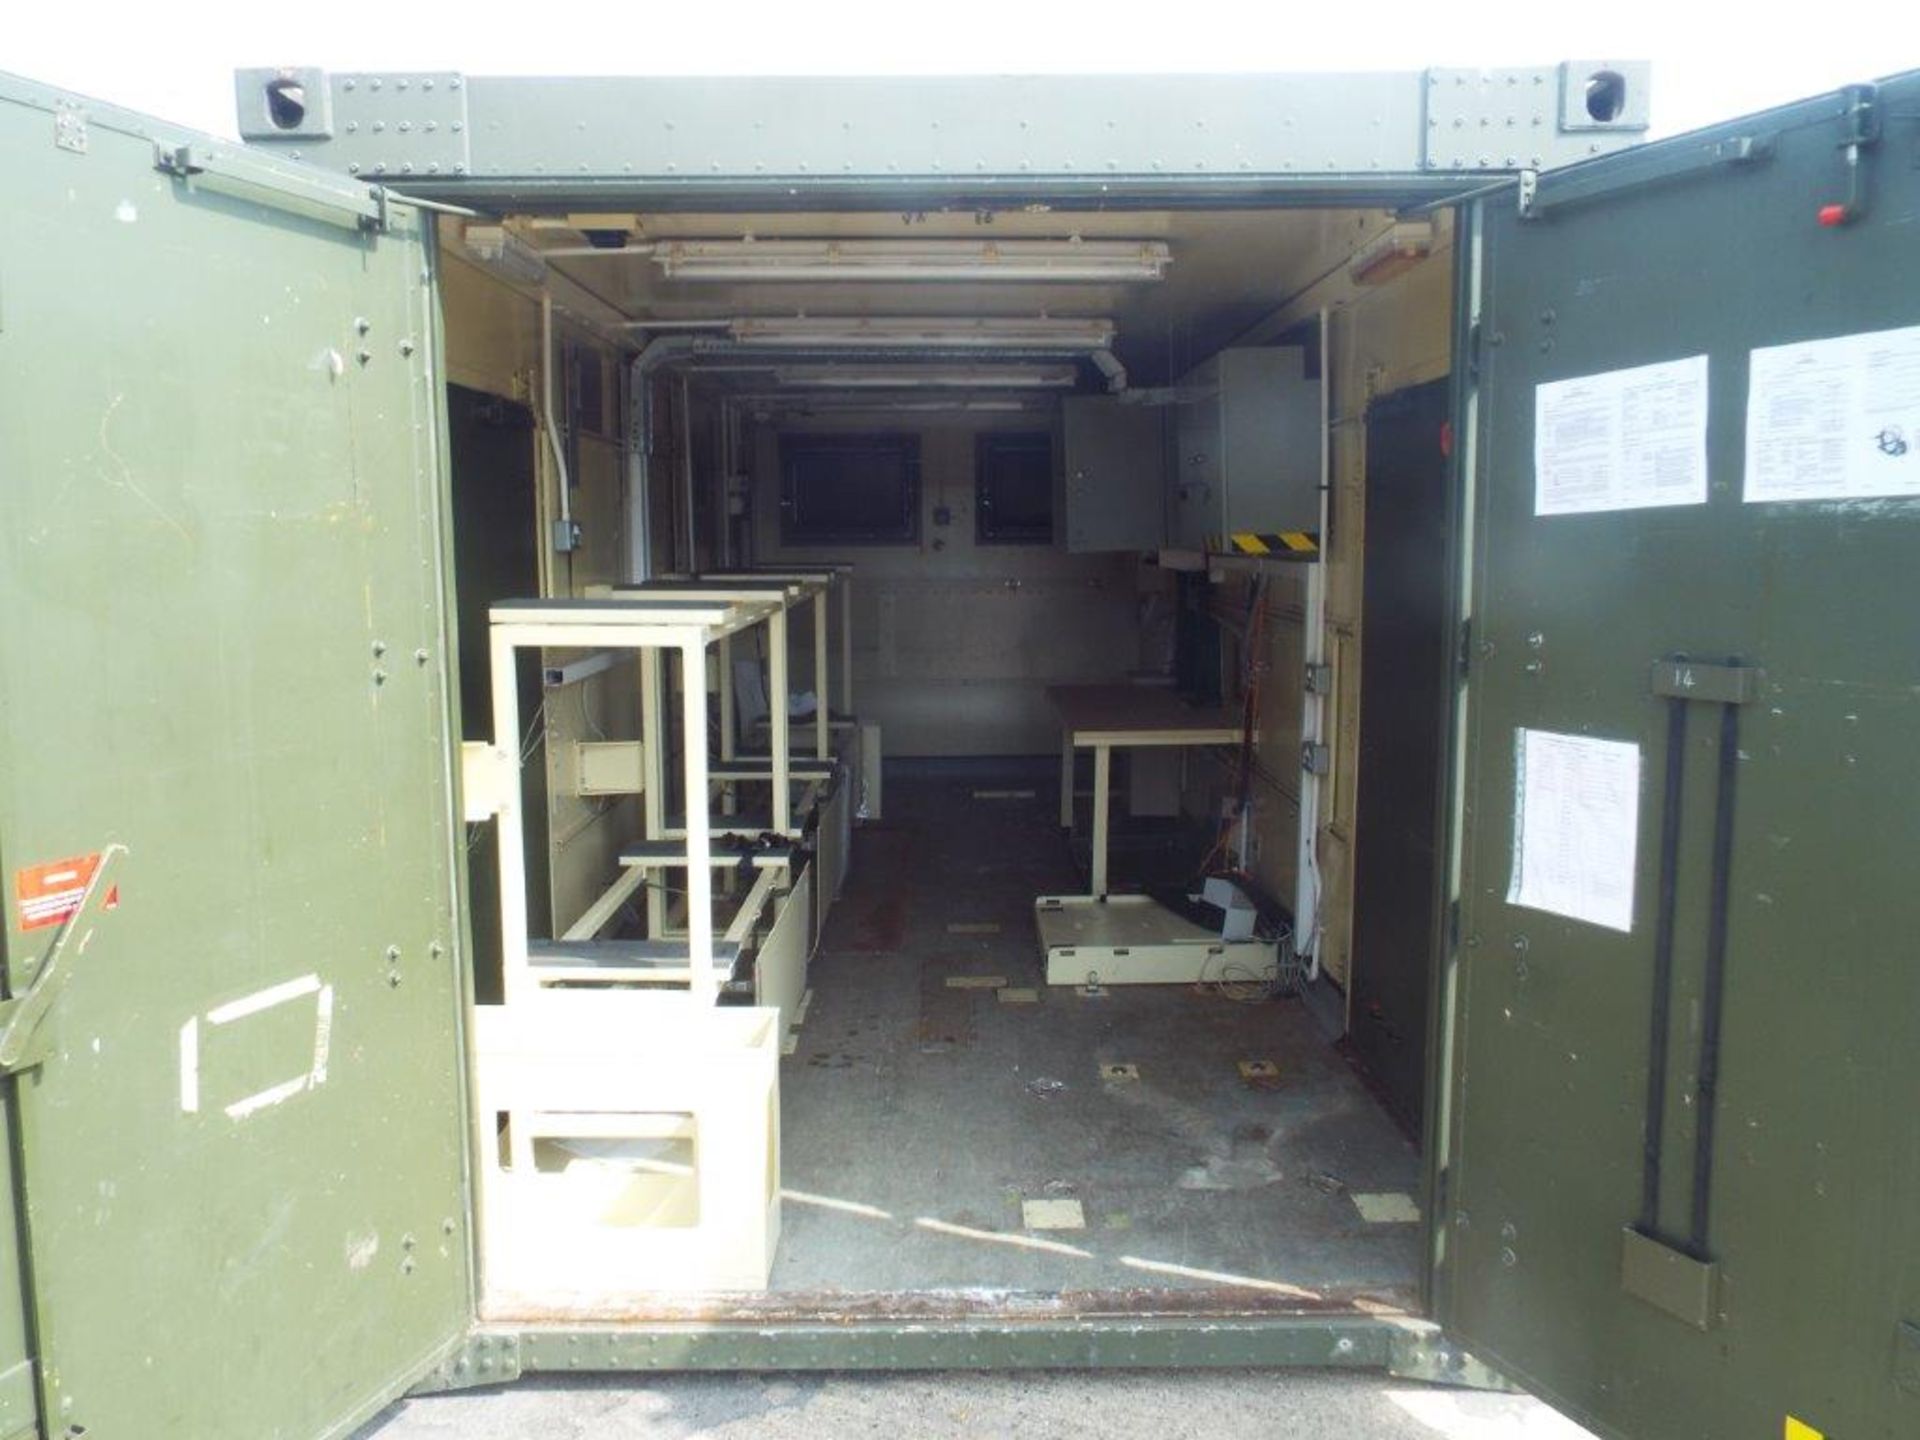 20ft ISO Shipping Container/ Office Unit C/W Twist Locks, Work Stations, Electrics, Lights etc - Image 2 of 28